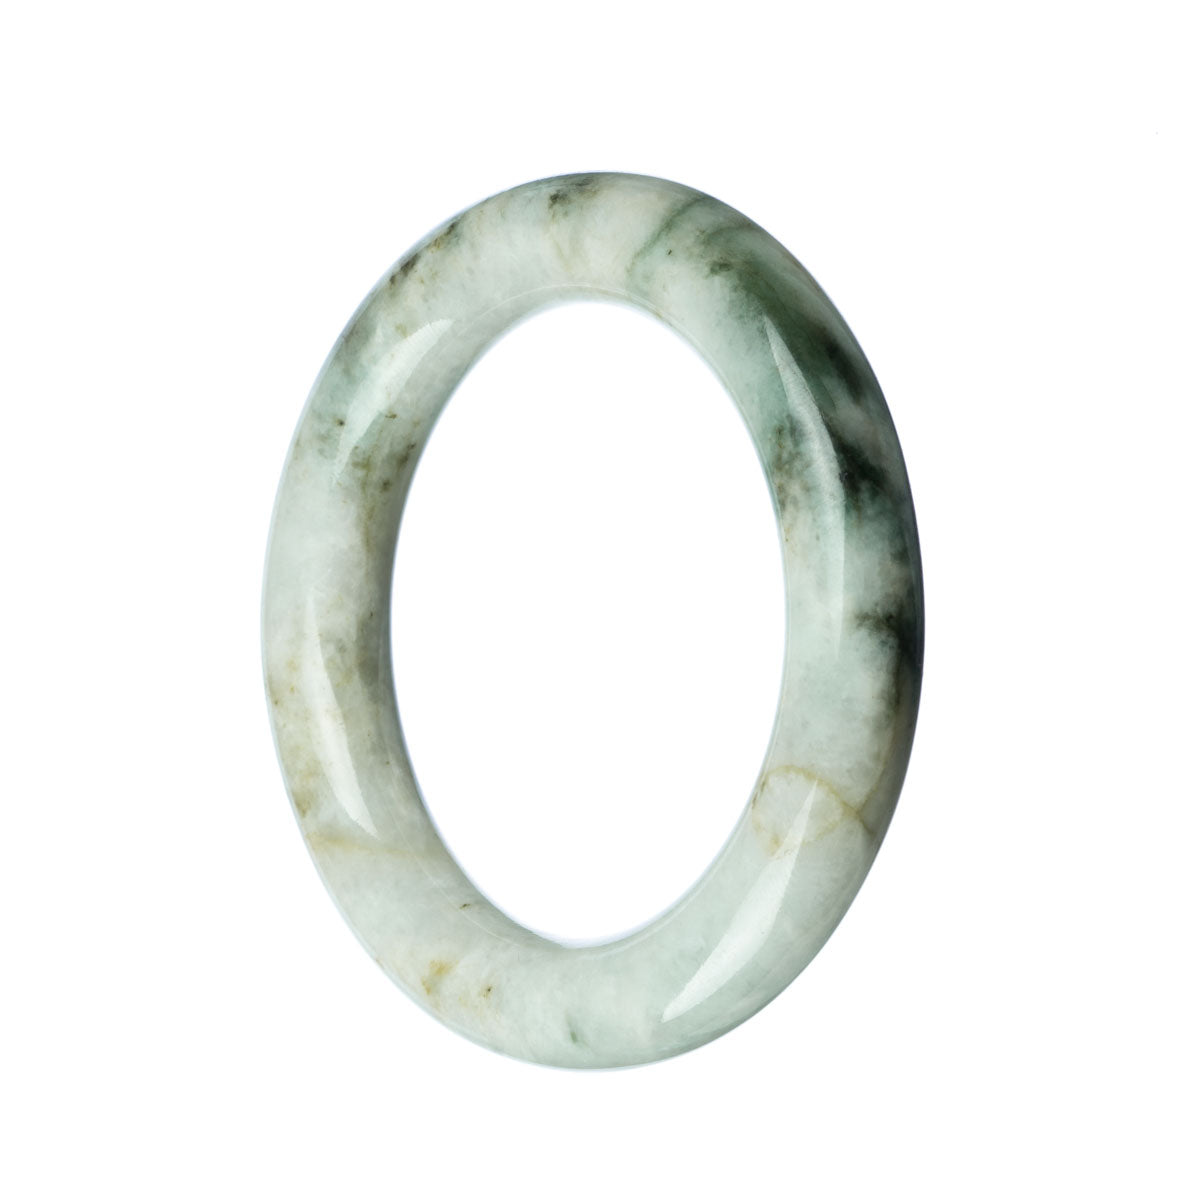 A close-up of a round, Real Grade A White Green Jade Bracelet with a diameter of 57mm. The bracelet showcases a beautiful blend of white and green tones, exuding elegance and natural beauty. A stunning piece from MAYS GEMS.